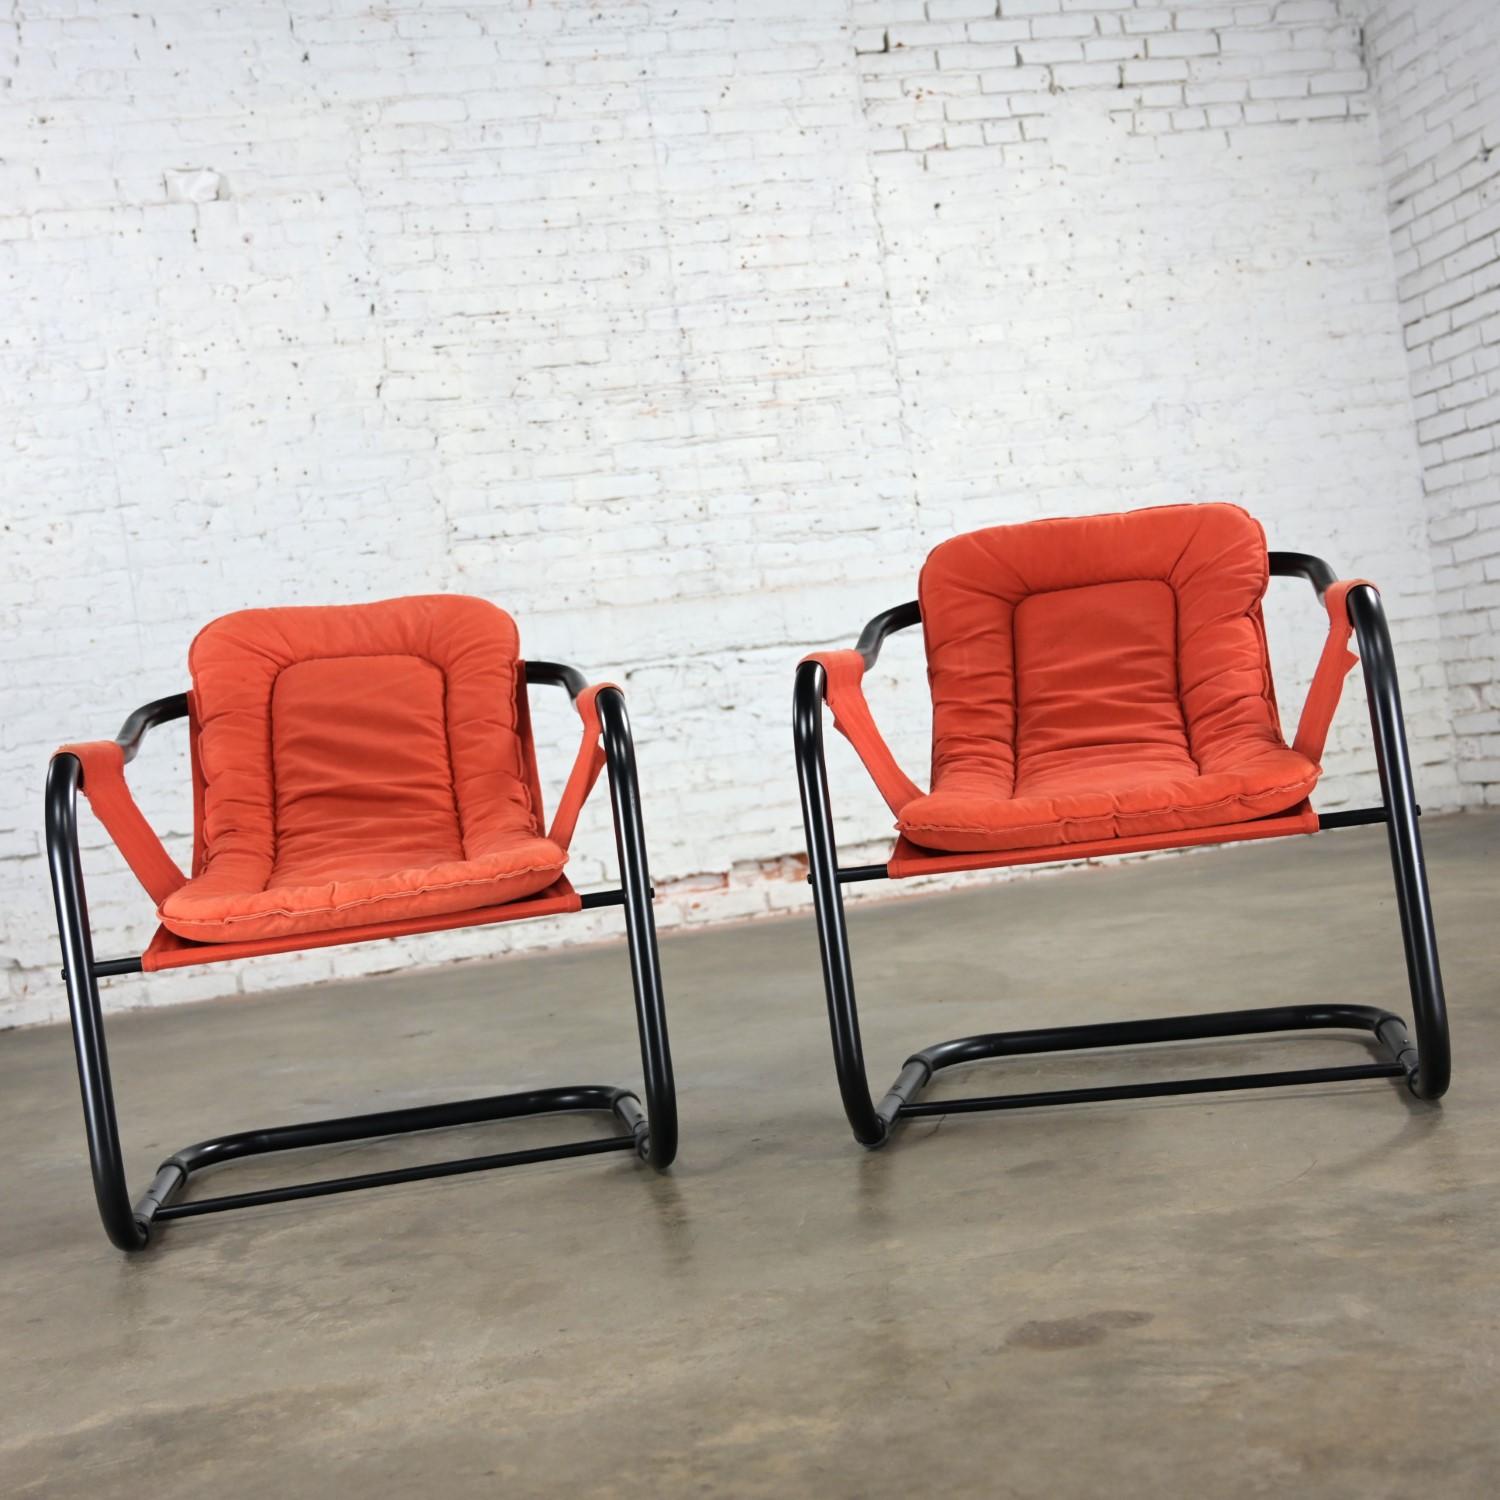 1970’s Modern Orange & Black Tube Cantilever Sling Lounge Chairs Jerry Johnson S In Good Condition For Sale In Topeka, KS